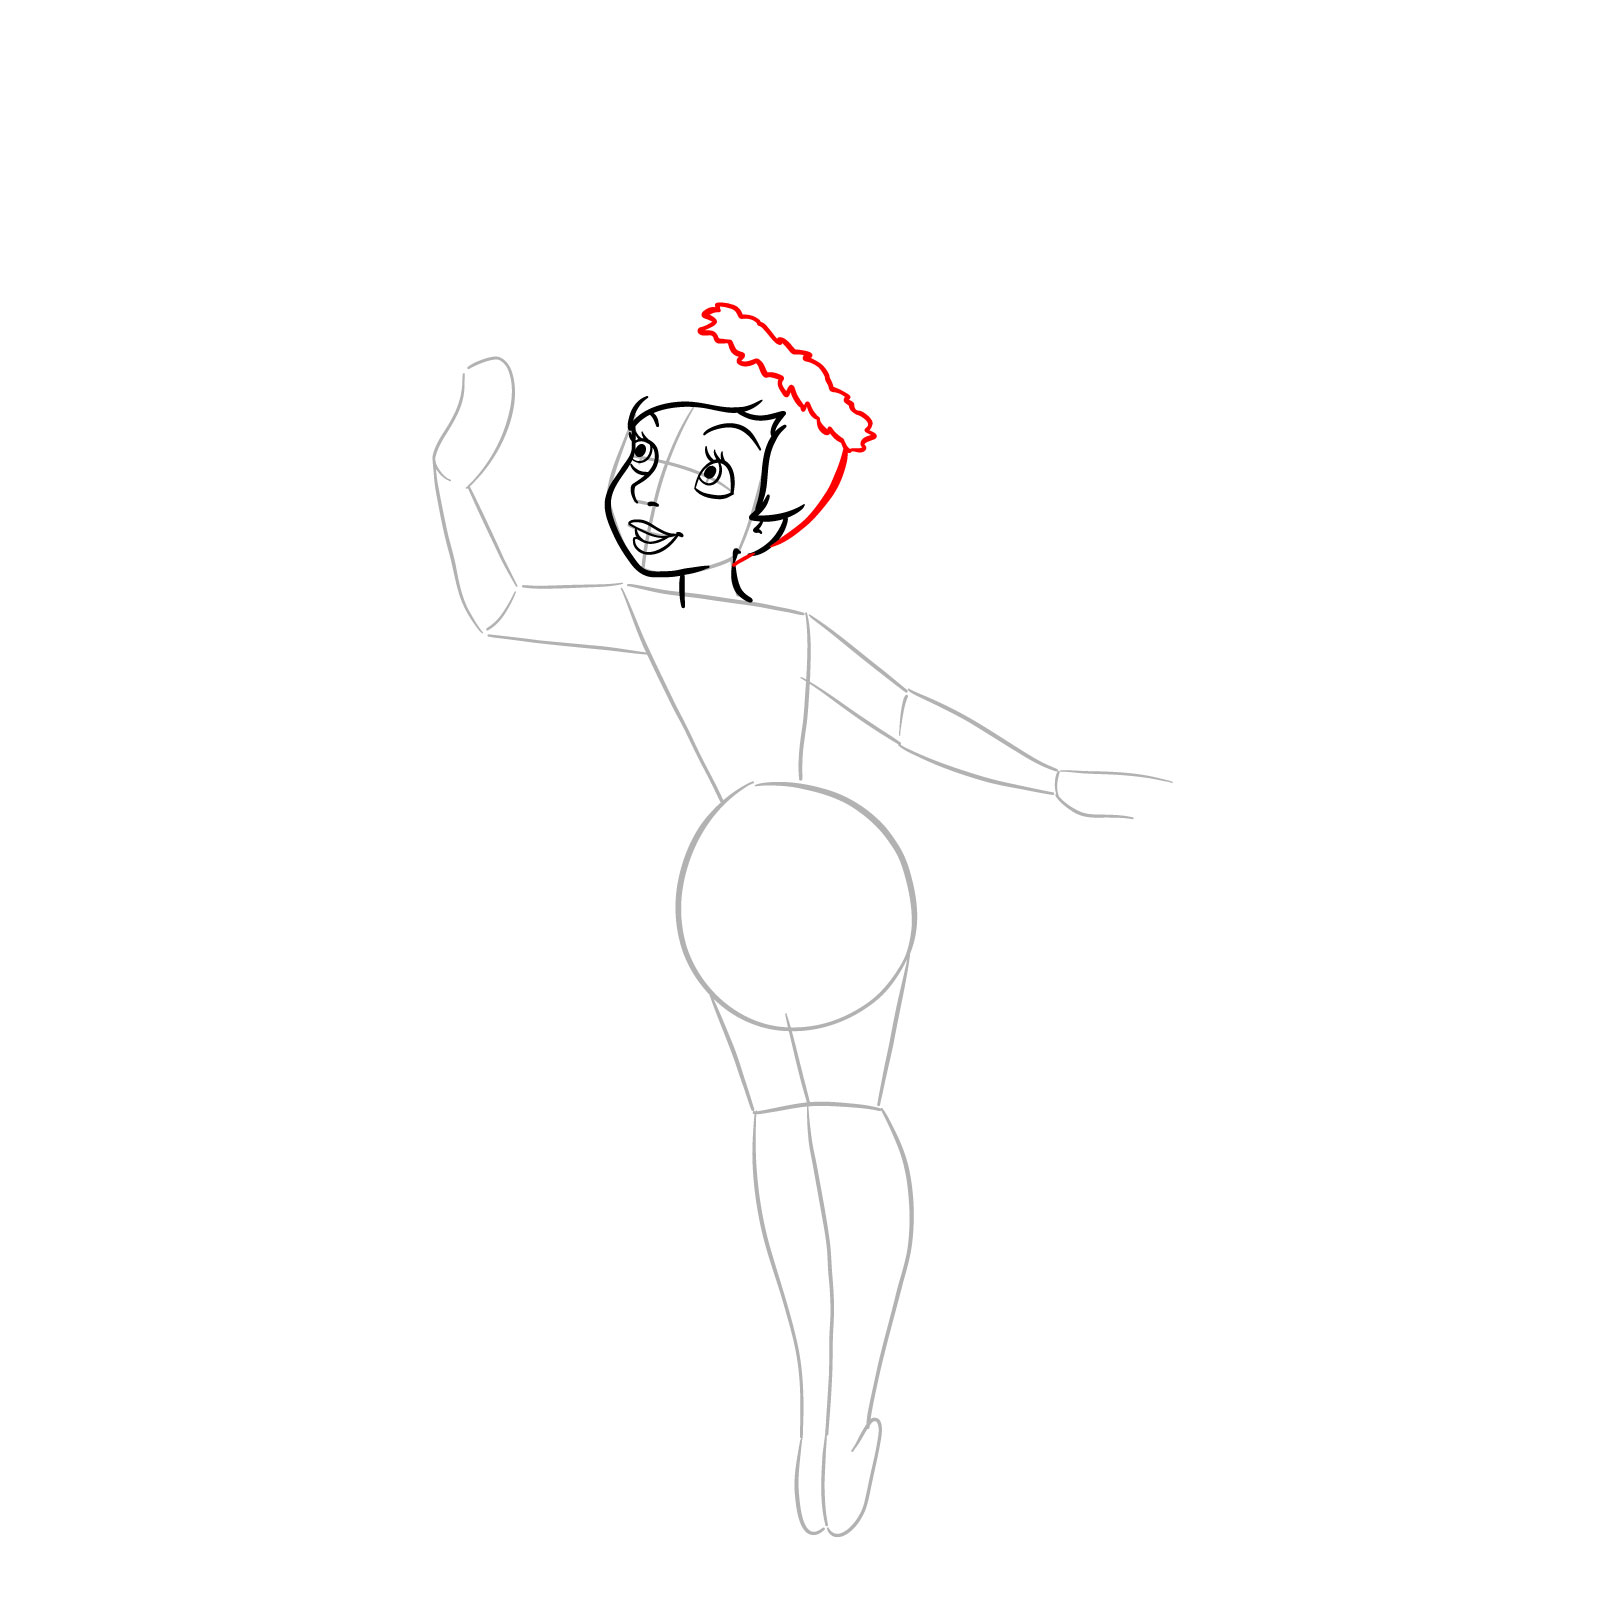 How to draw Tinker Bell in a Christmas costume - step 11